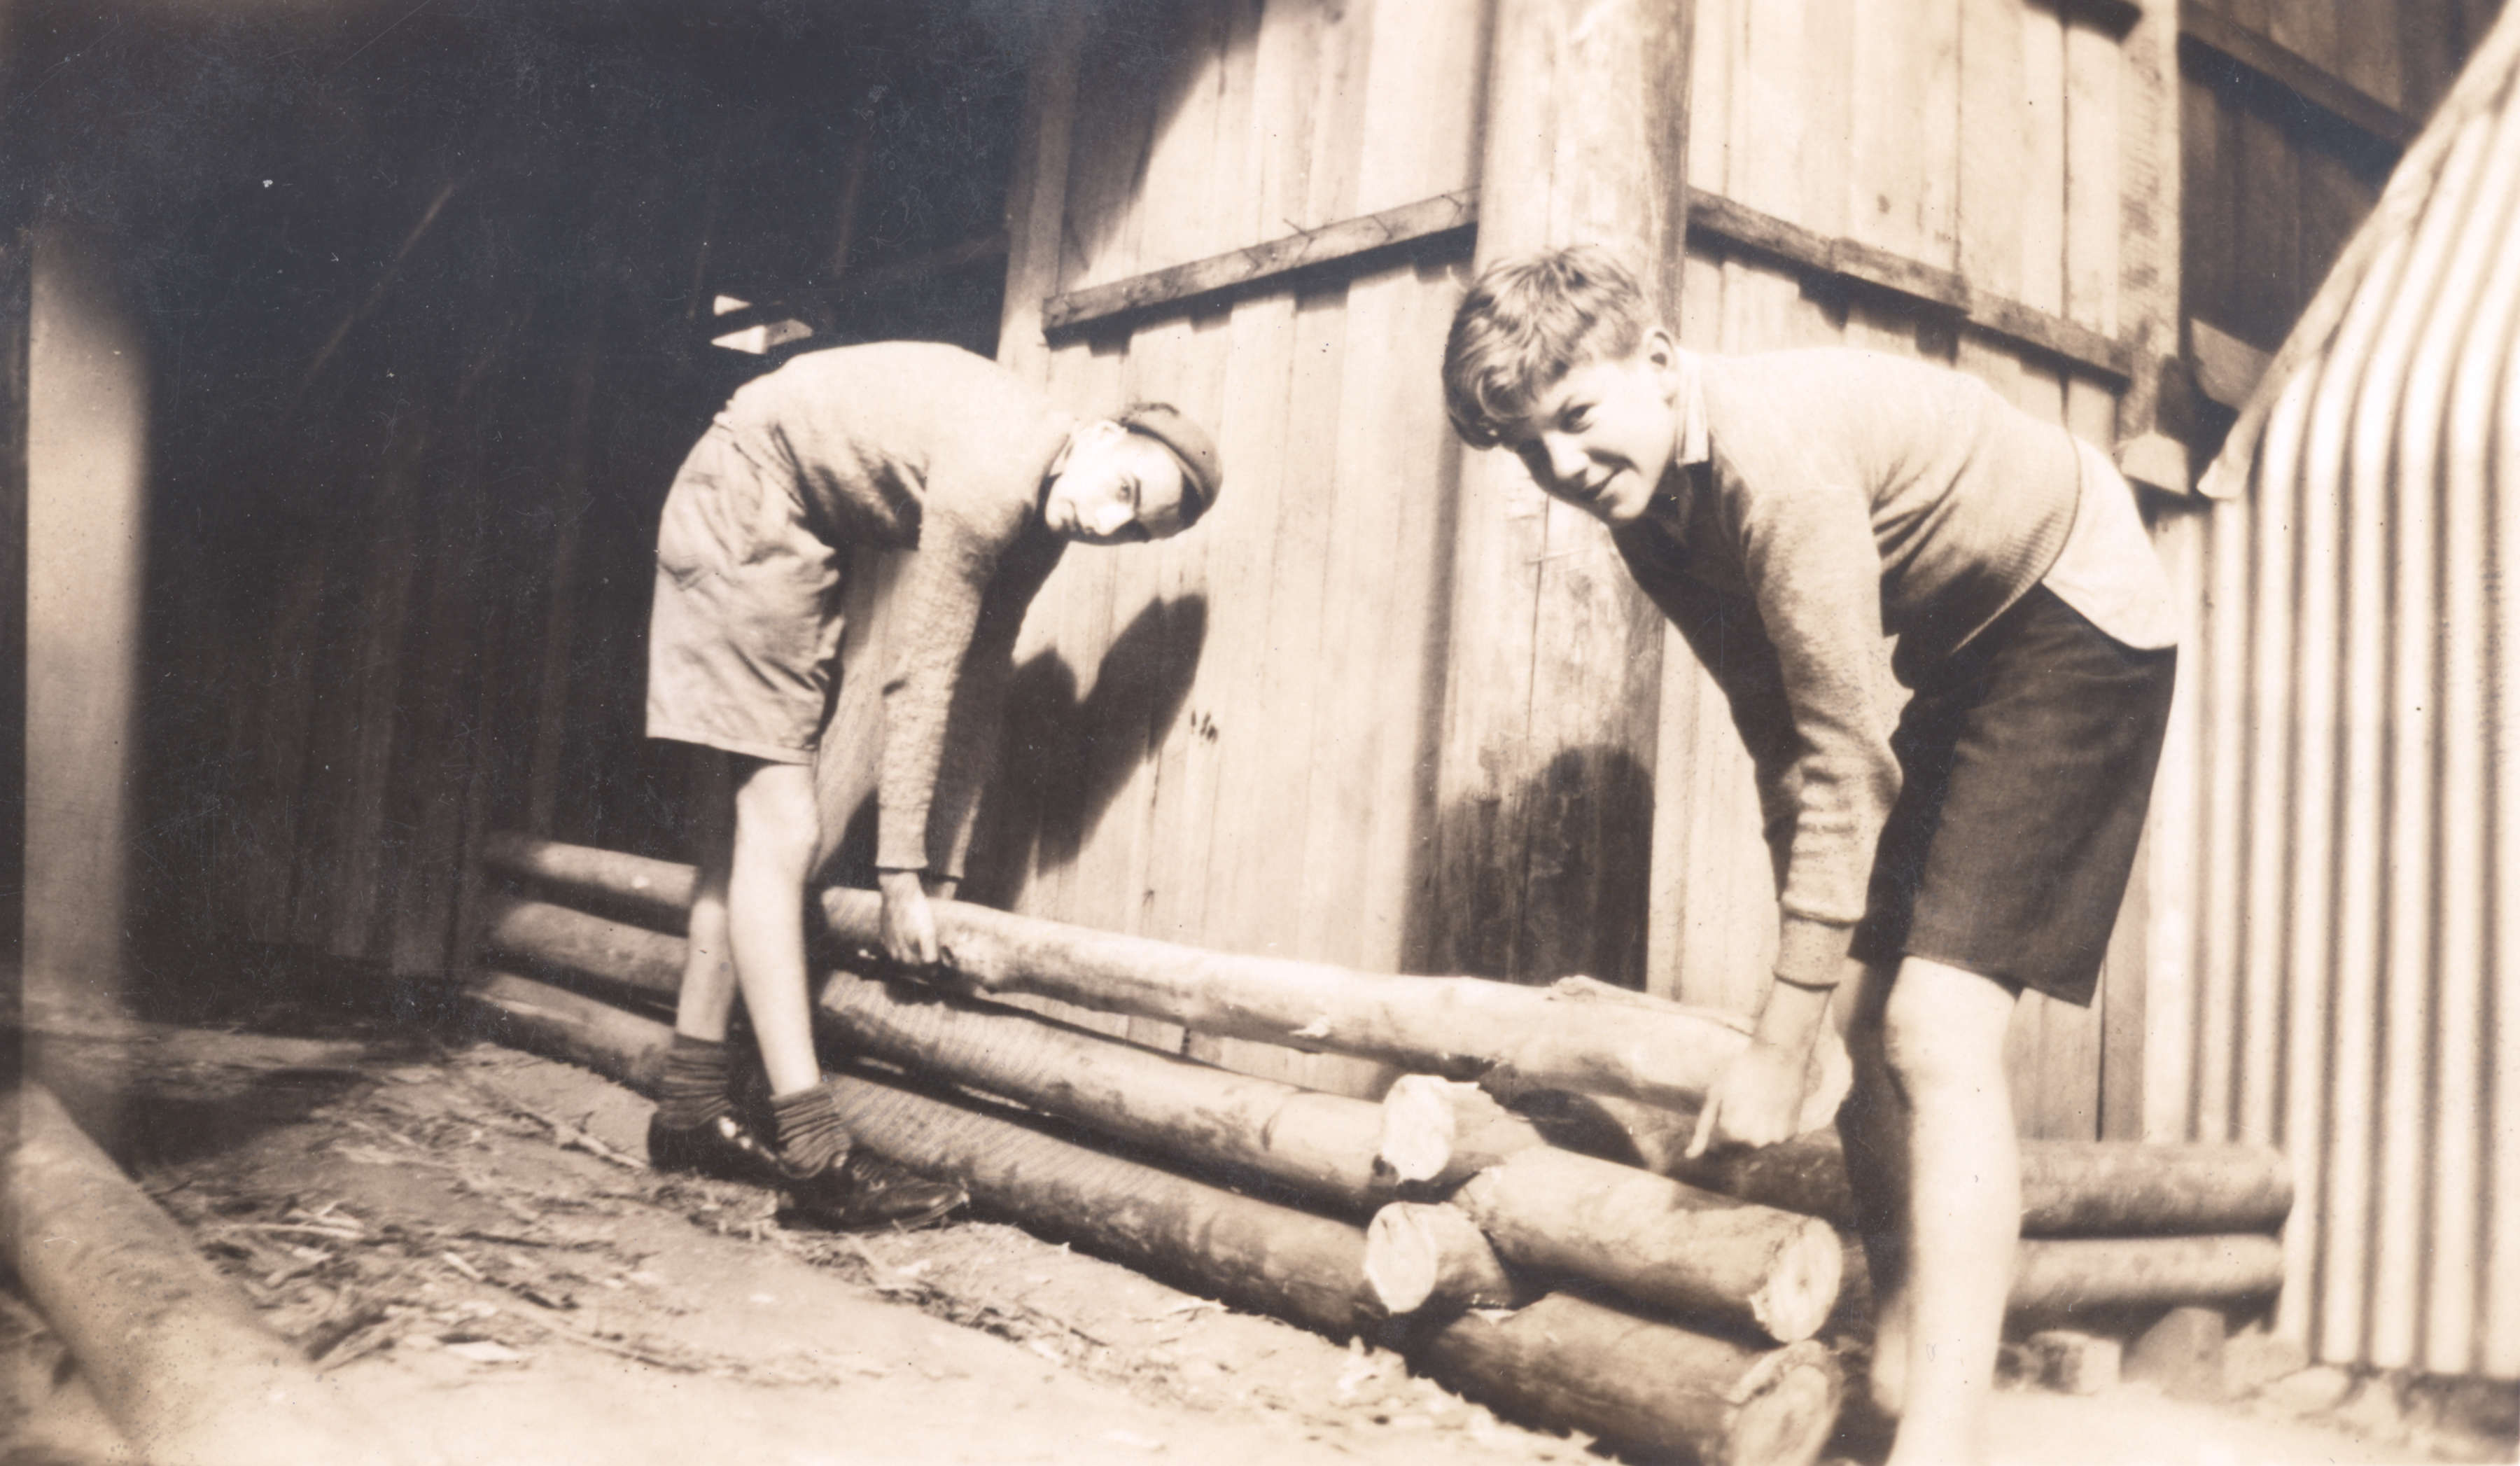 R Lord and G Salter building Chauncy Vale hut, 1947.